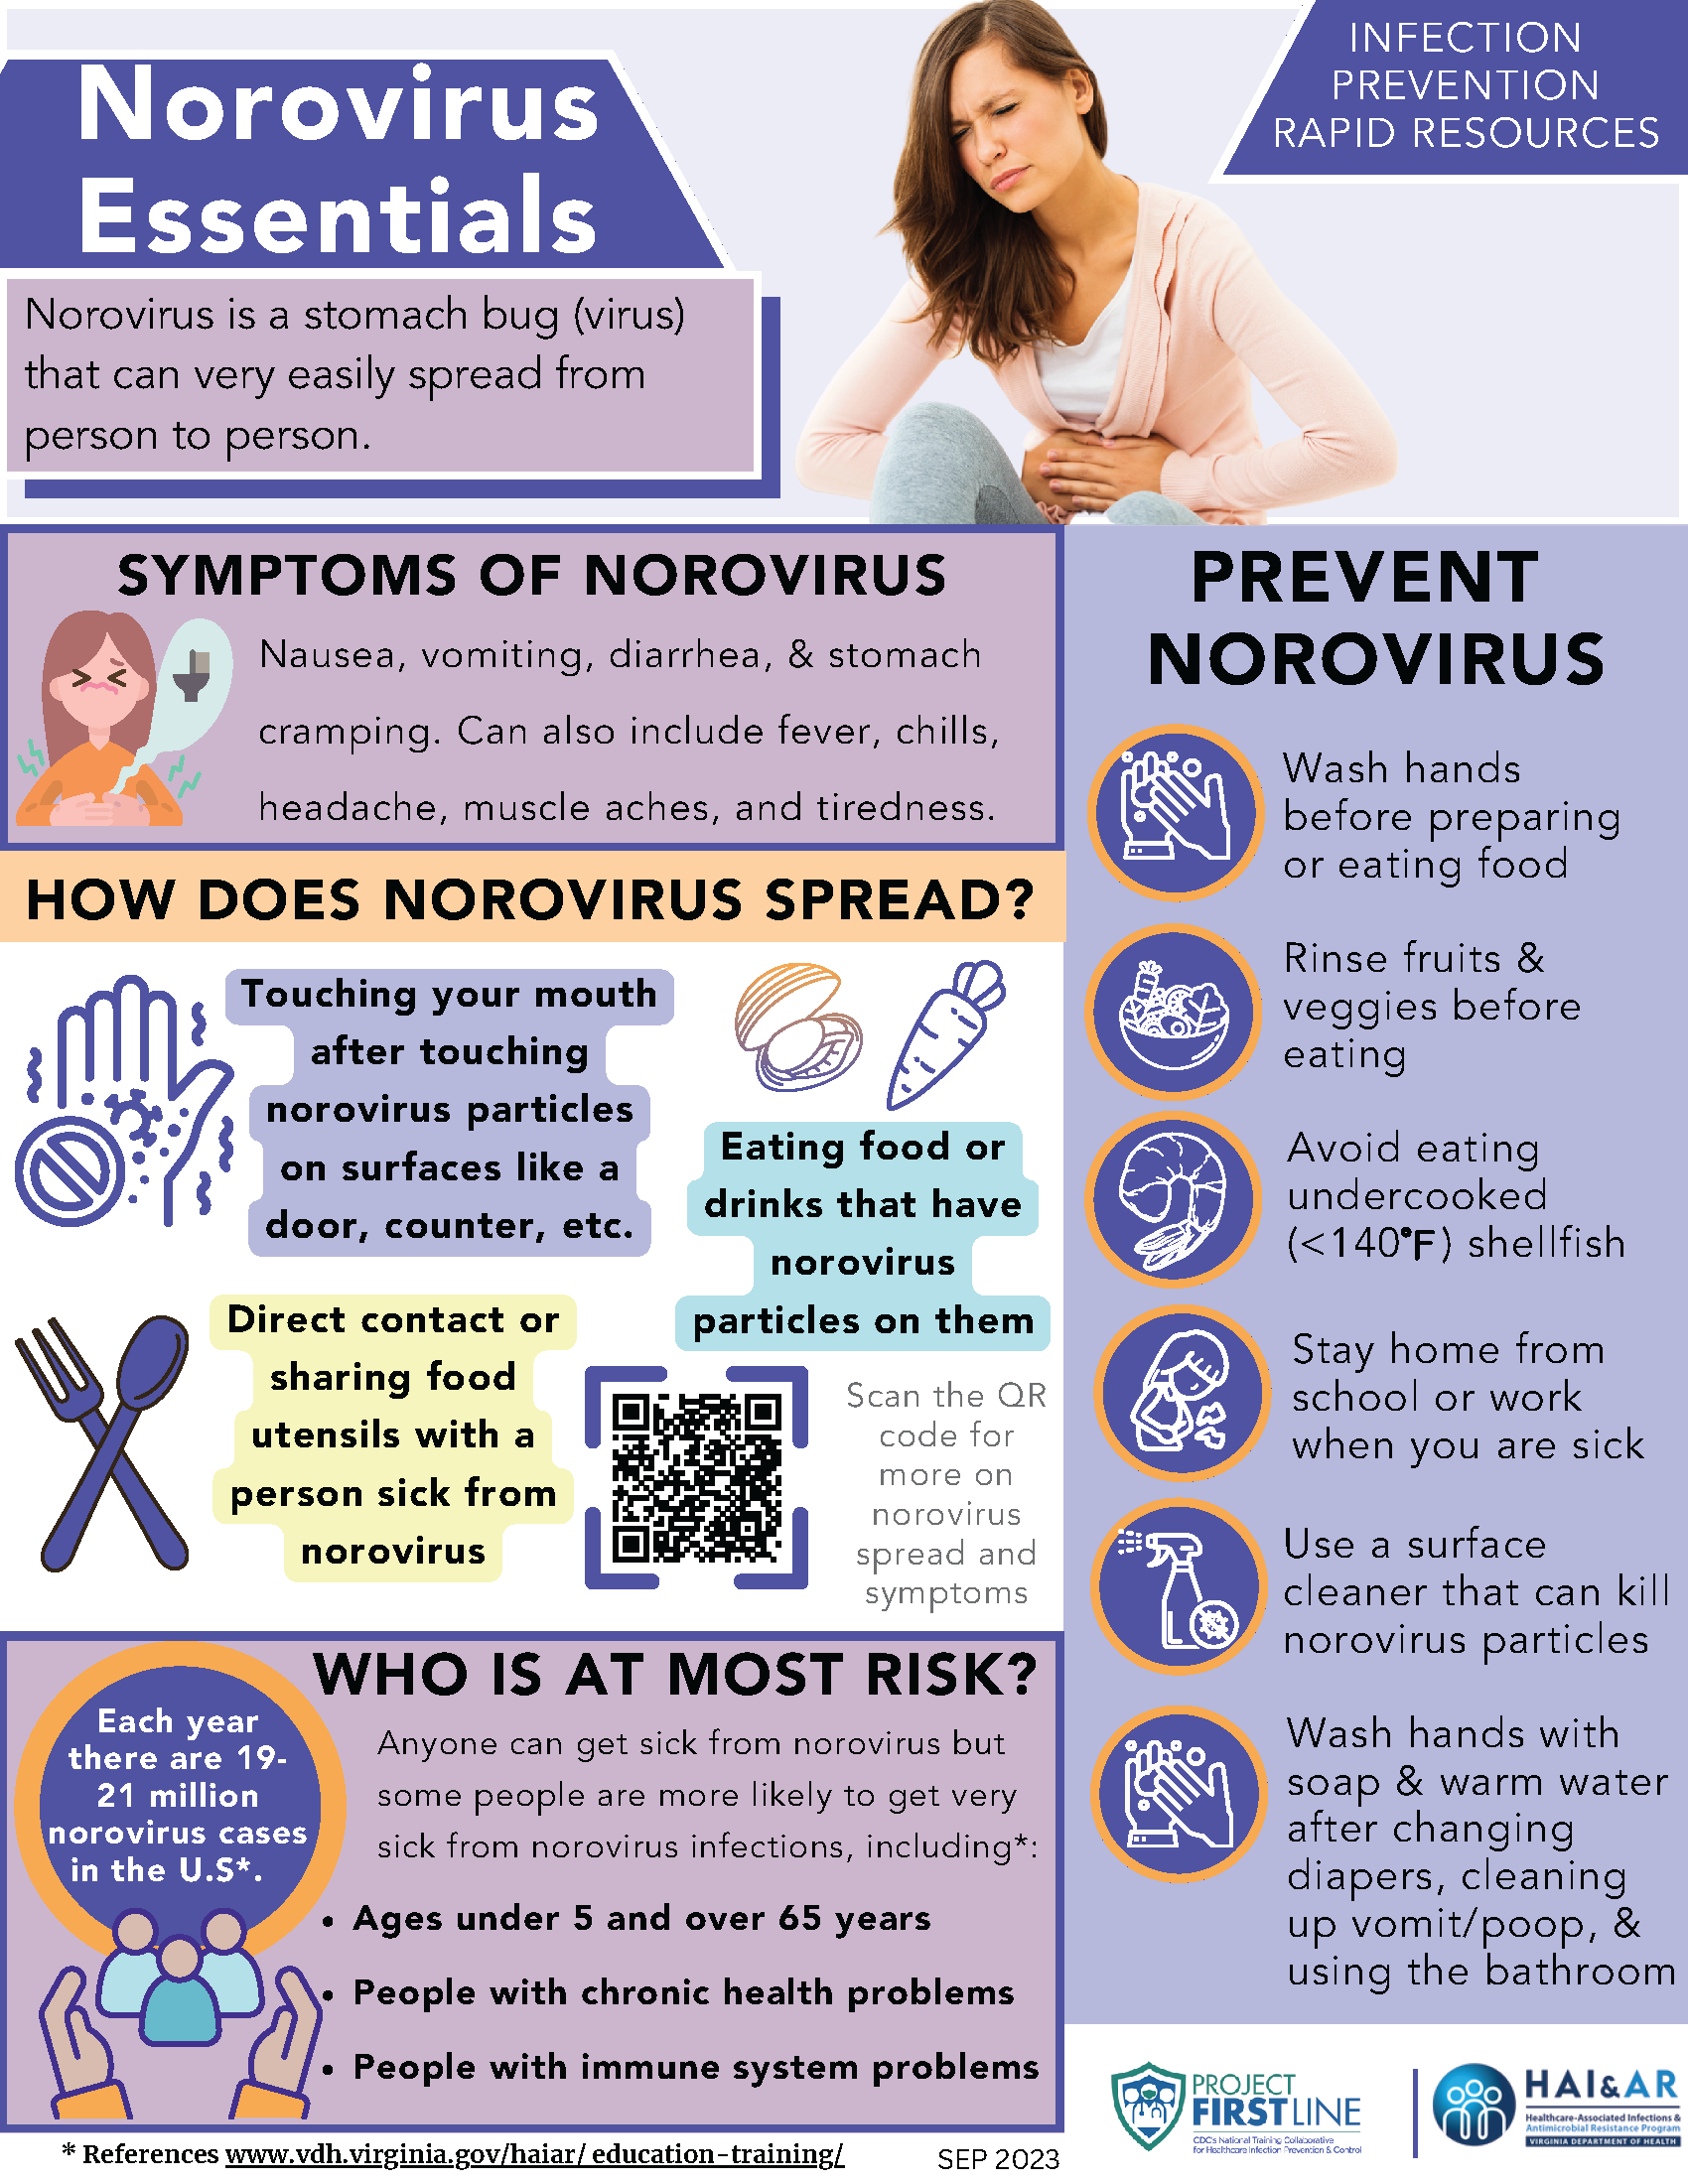 Mini-image of the Norovirus Essentials informational flyer.